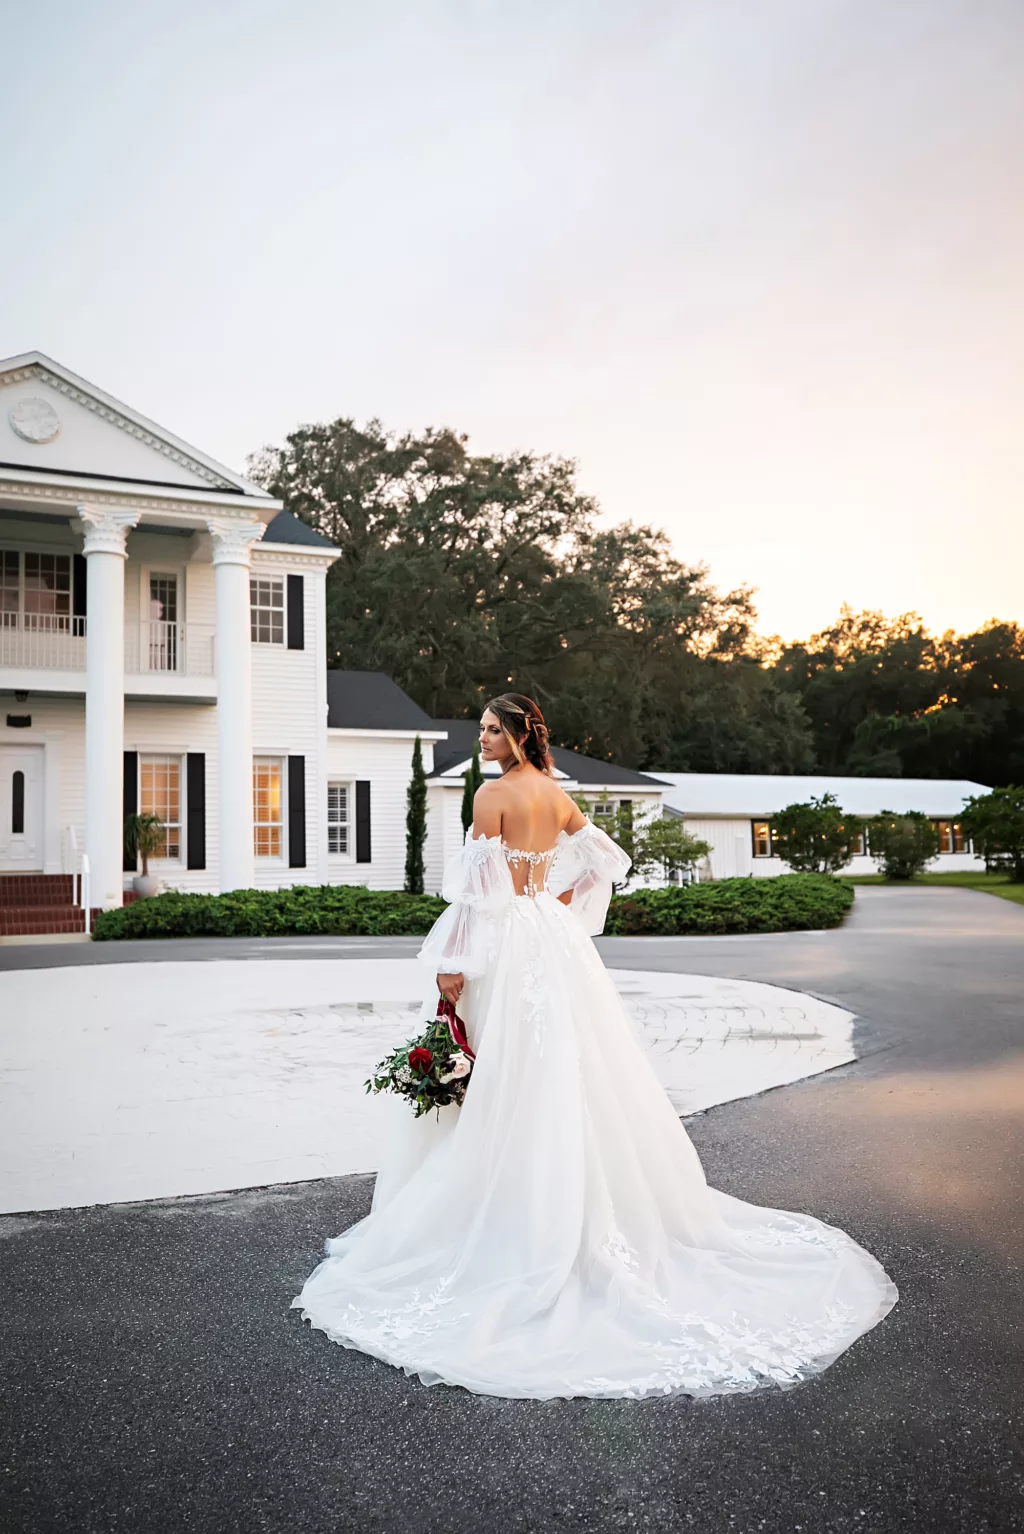 White Tulle A-Line Wedding Dress with Off The Shoulder Puff Sleeves | Tampa Bay Event Venue Legacy Lane Weddings | Photographer Limelight Photography | Videographer Priceless Studio Design